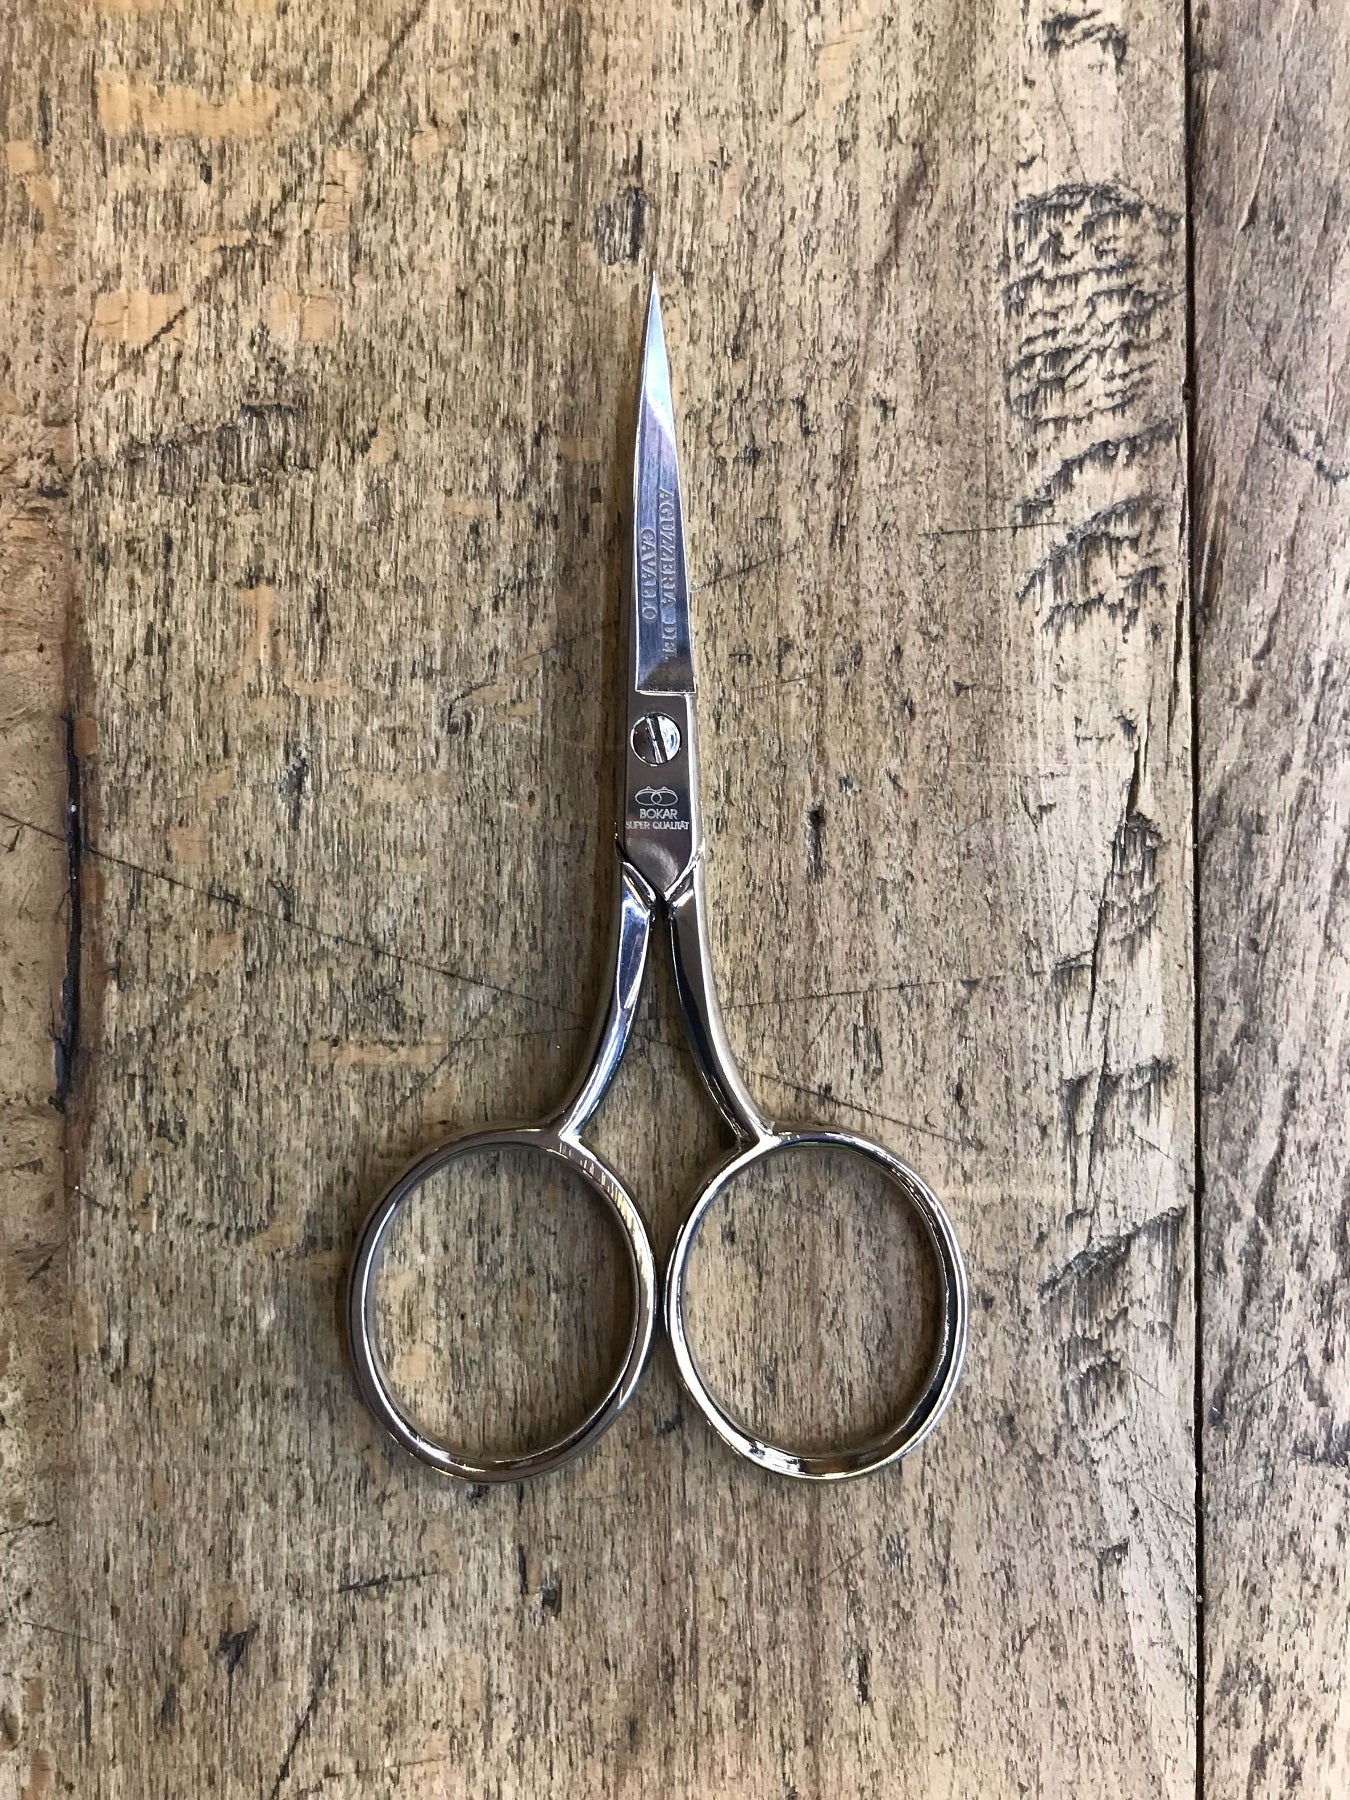 Embroidery and sewing scissors with large rings